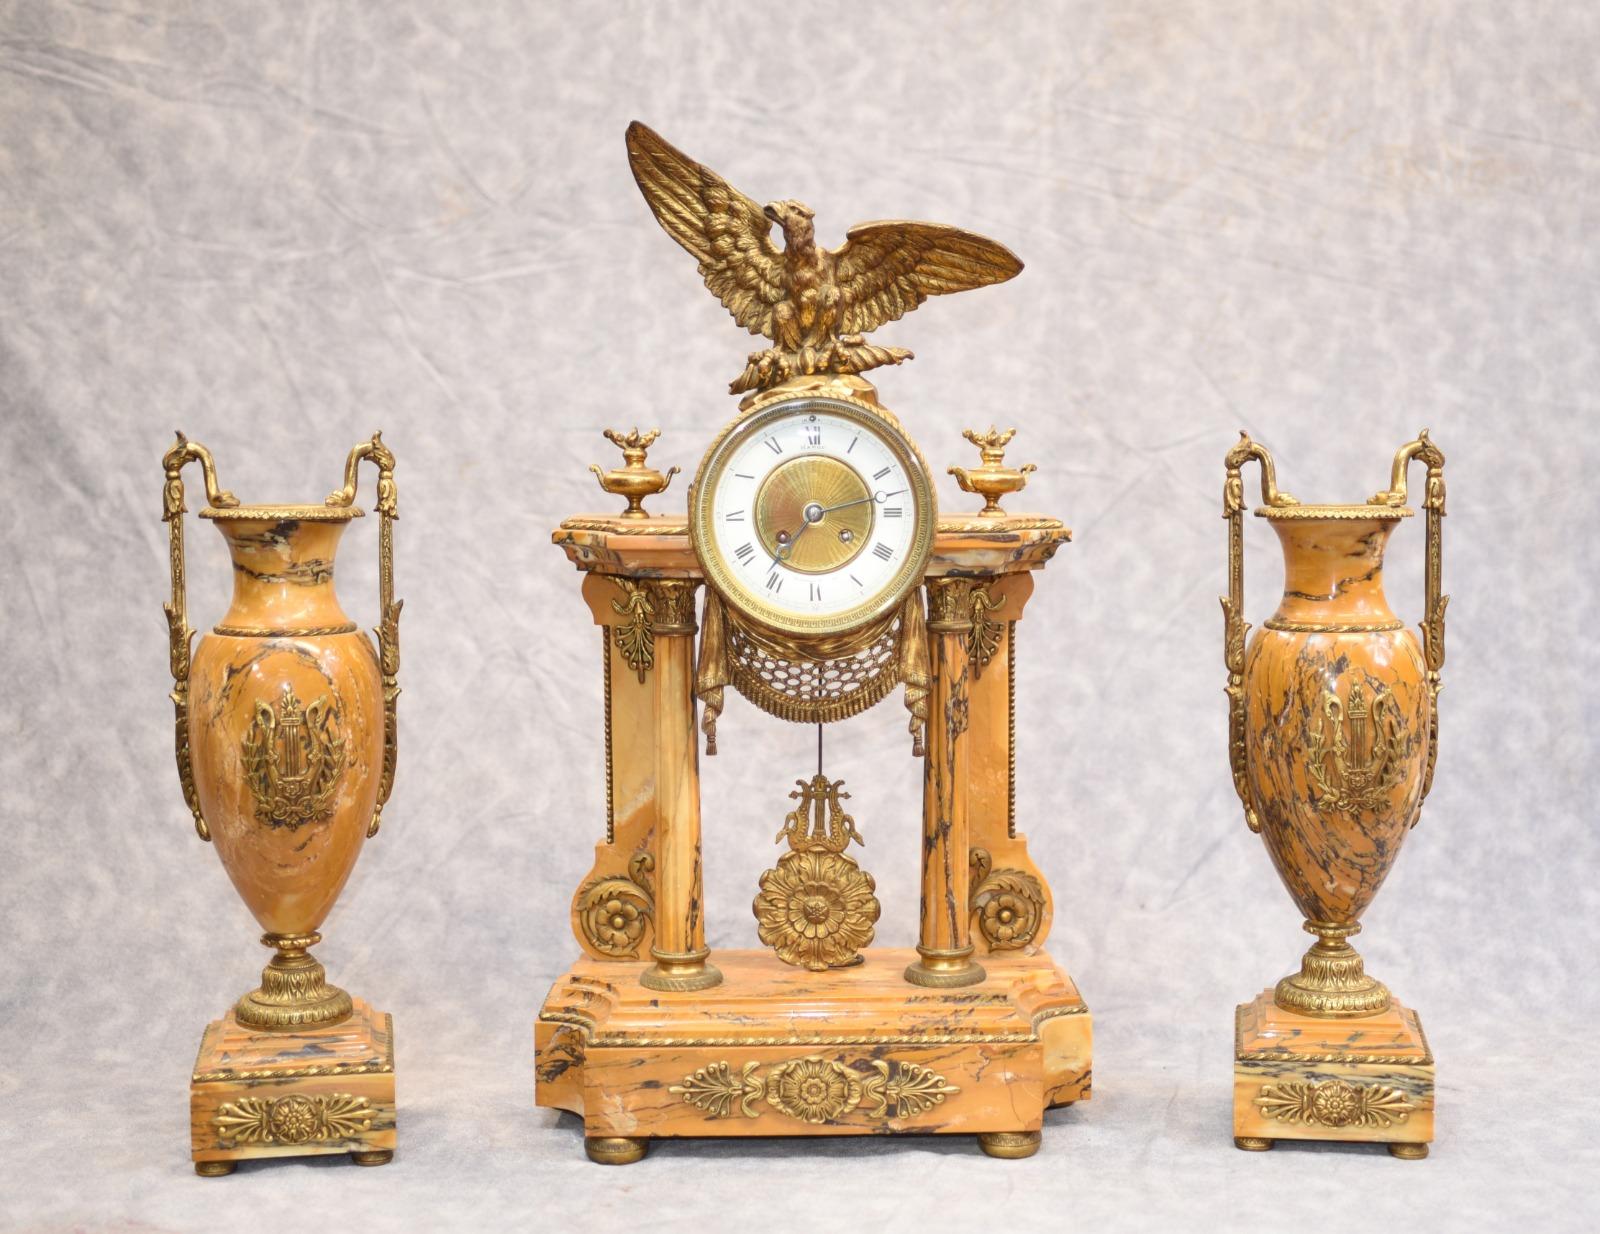 - Stunning French Empire marble and gilt clock set
- Central mantle clock flanked by two urns of amphora form
- We date this stunning work of art to circa 1880
- The first thing that really grabbed our attention are the lovely pink hues to the